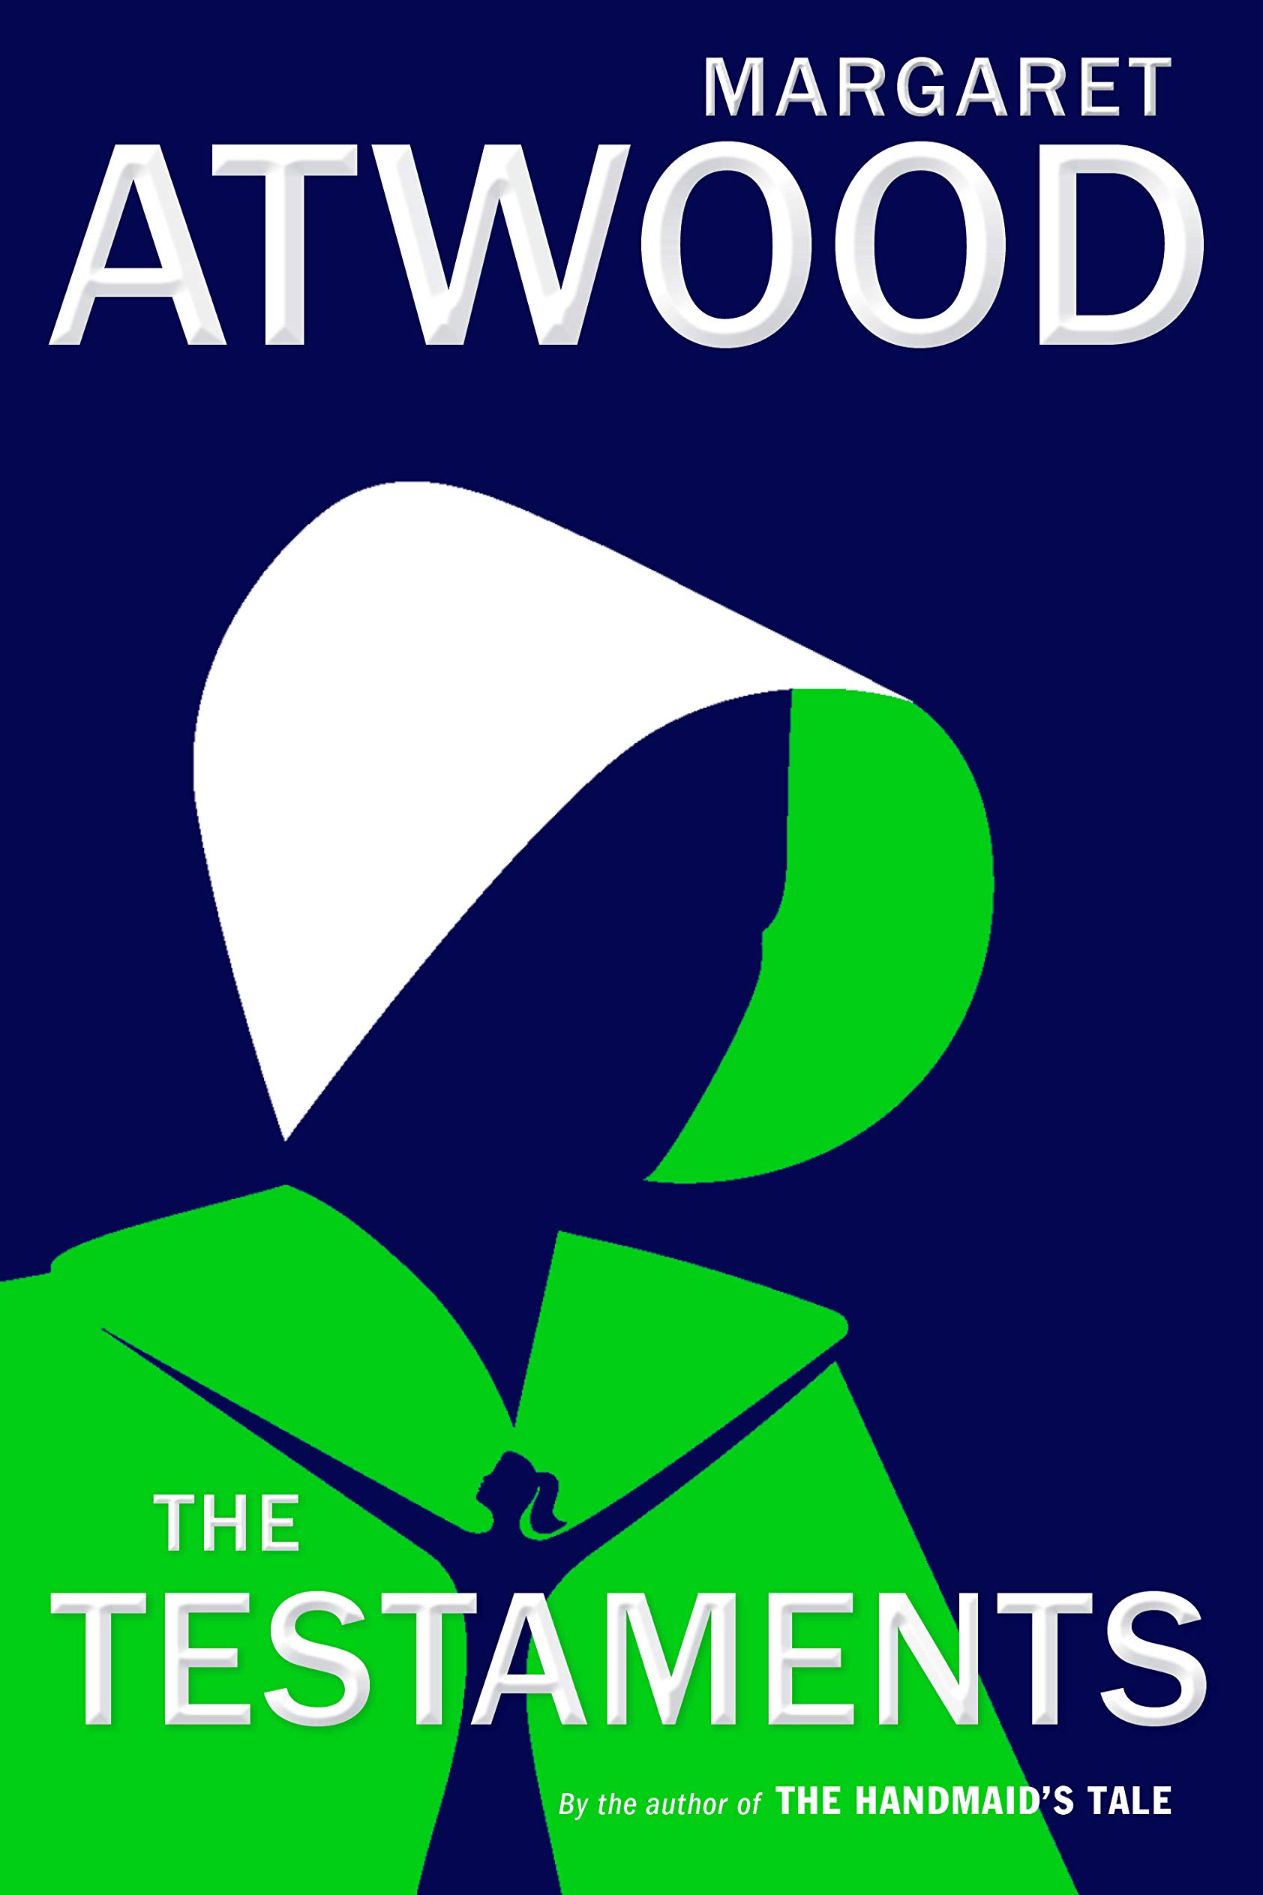 Temporary poster for the television series Margaret Atwood